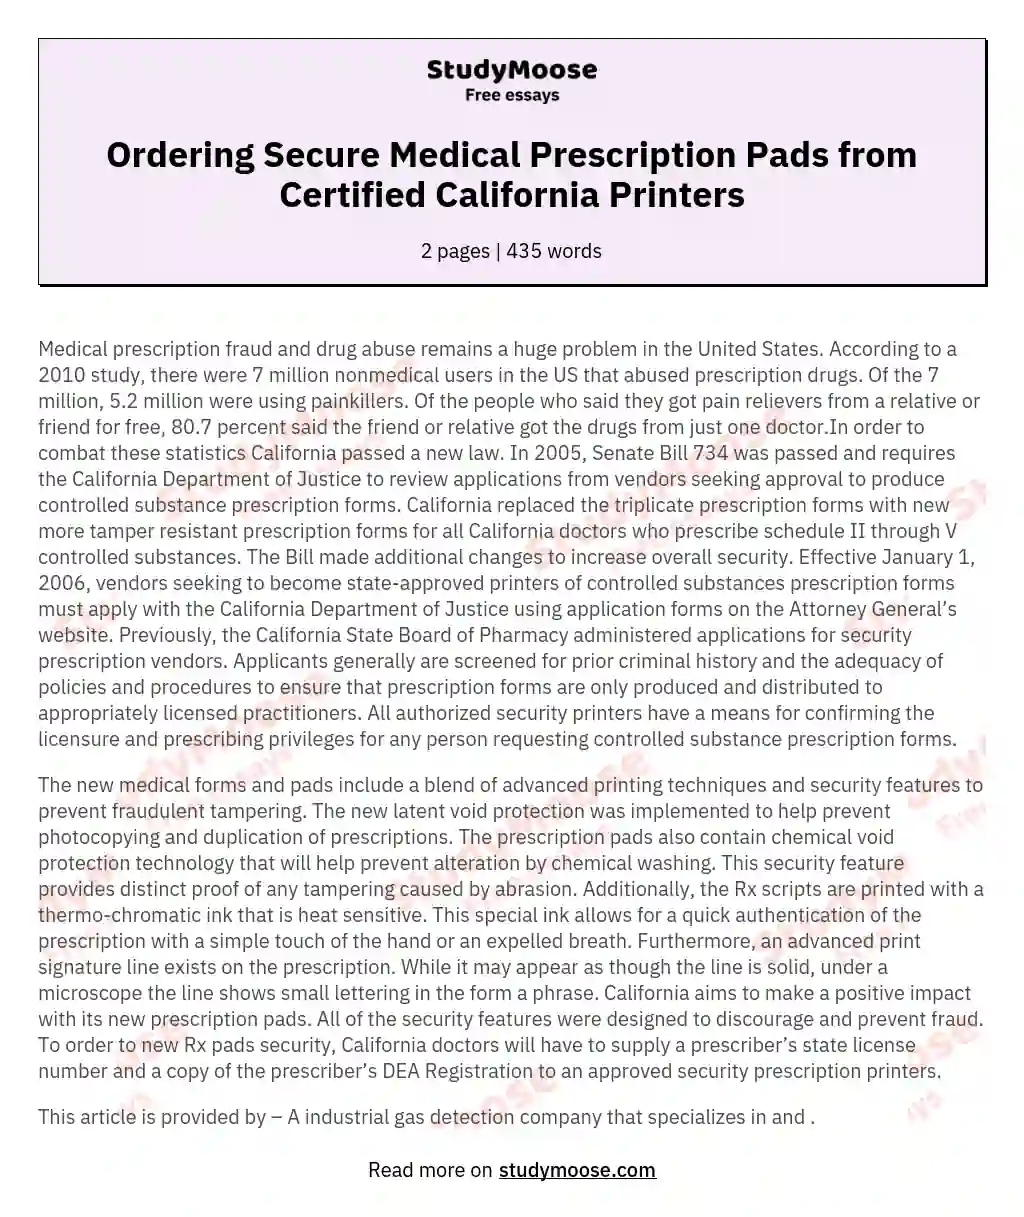 Ordering Secure Medical Prescription Pads from Certified California Printers essay